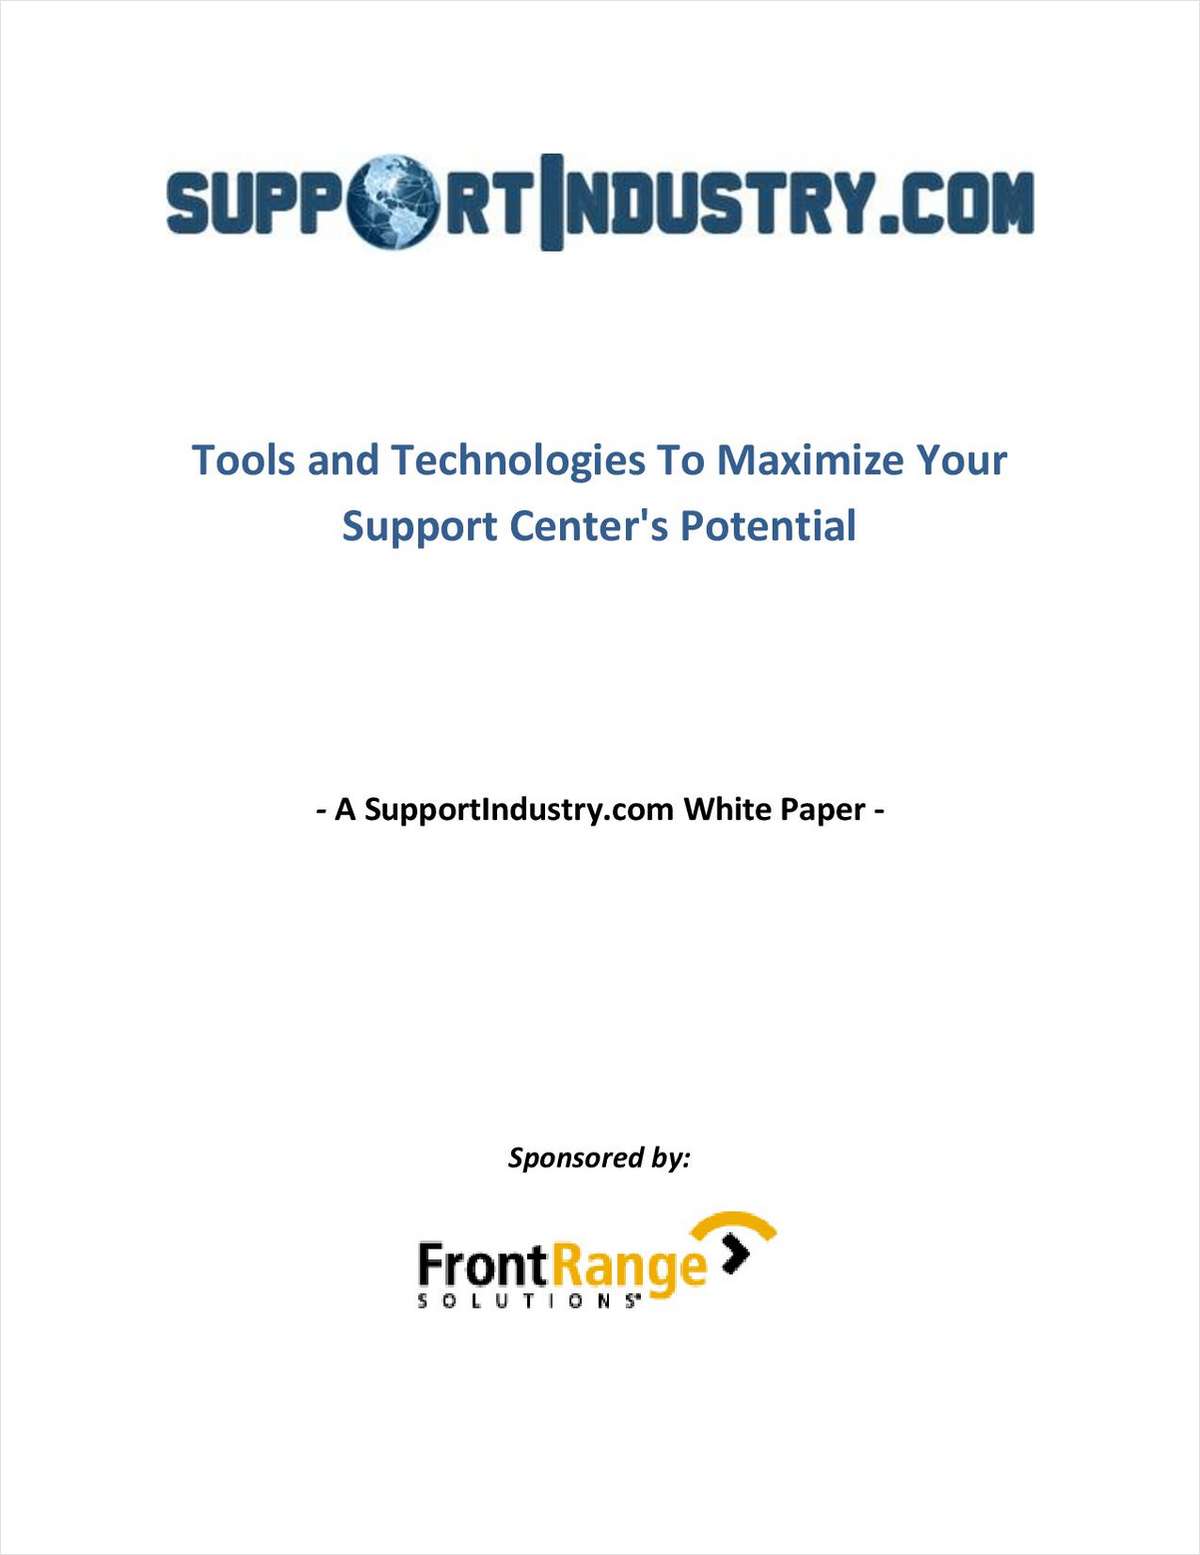 Tools and Technologies to Maximize Your Support Center's Potential